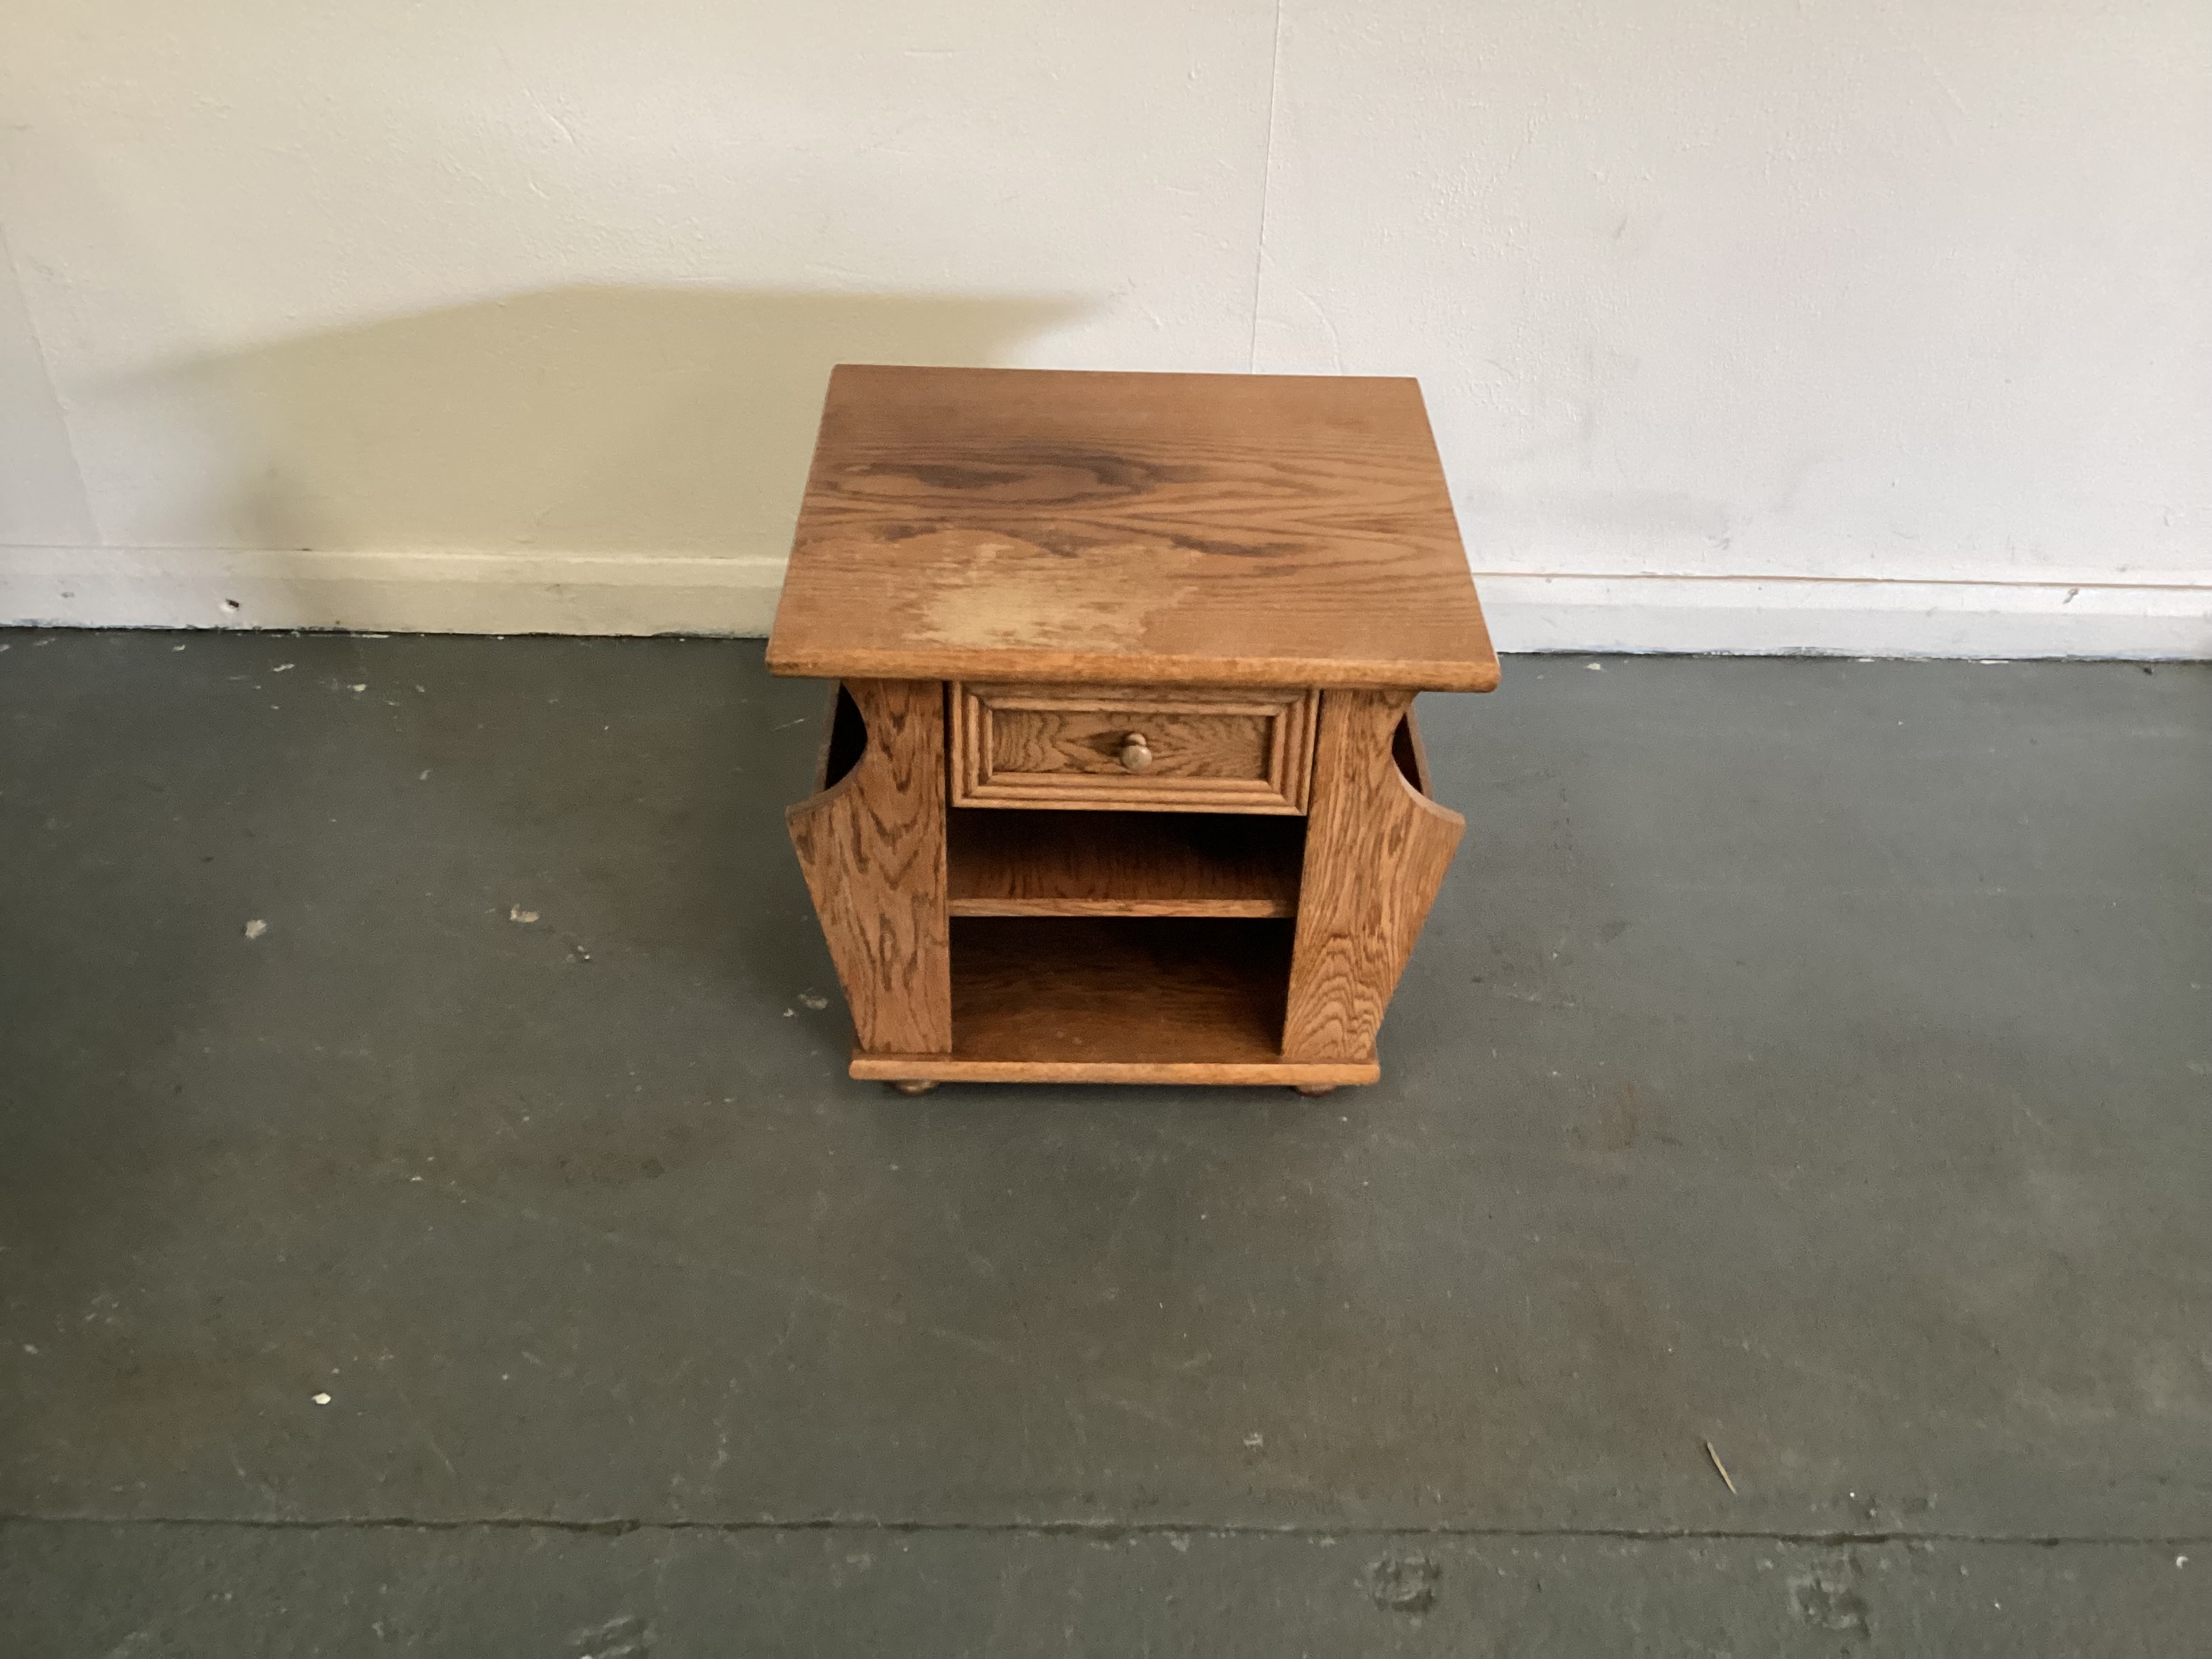    Wooden Sidetable